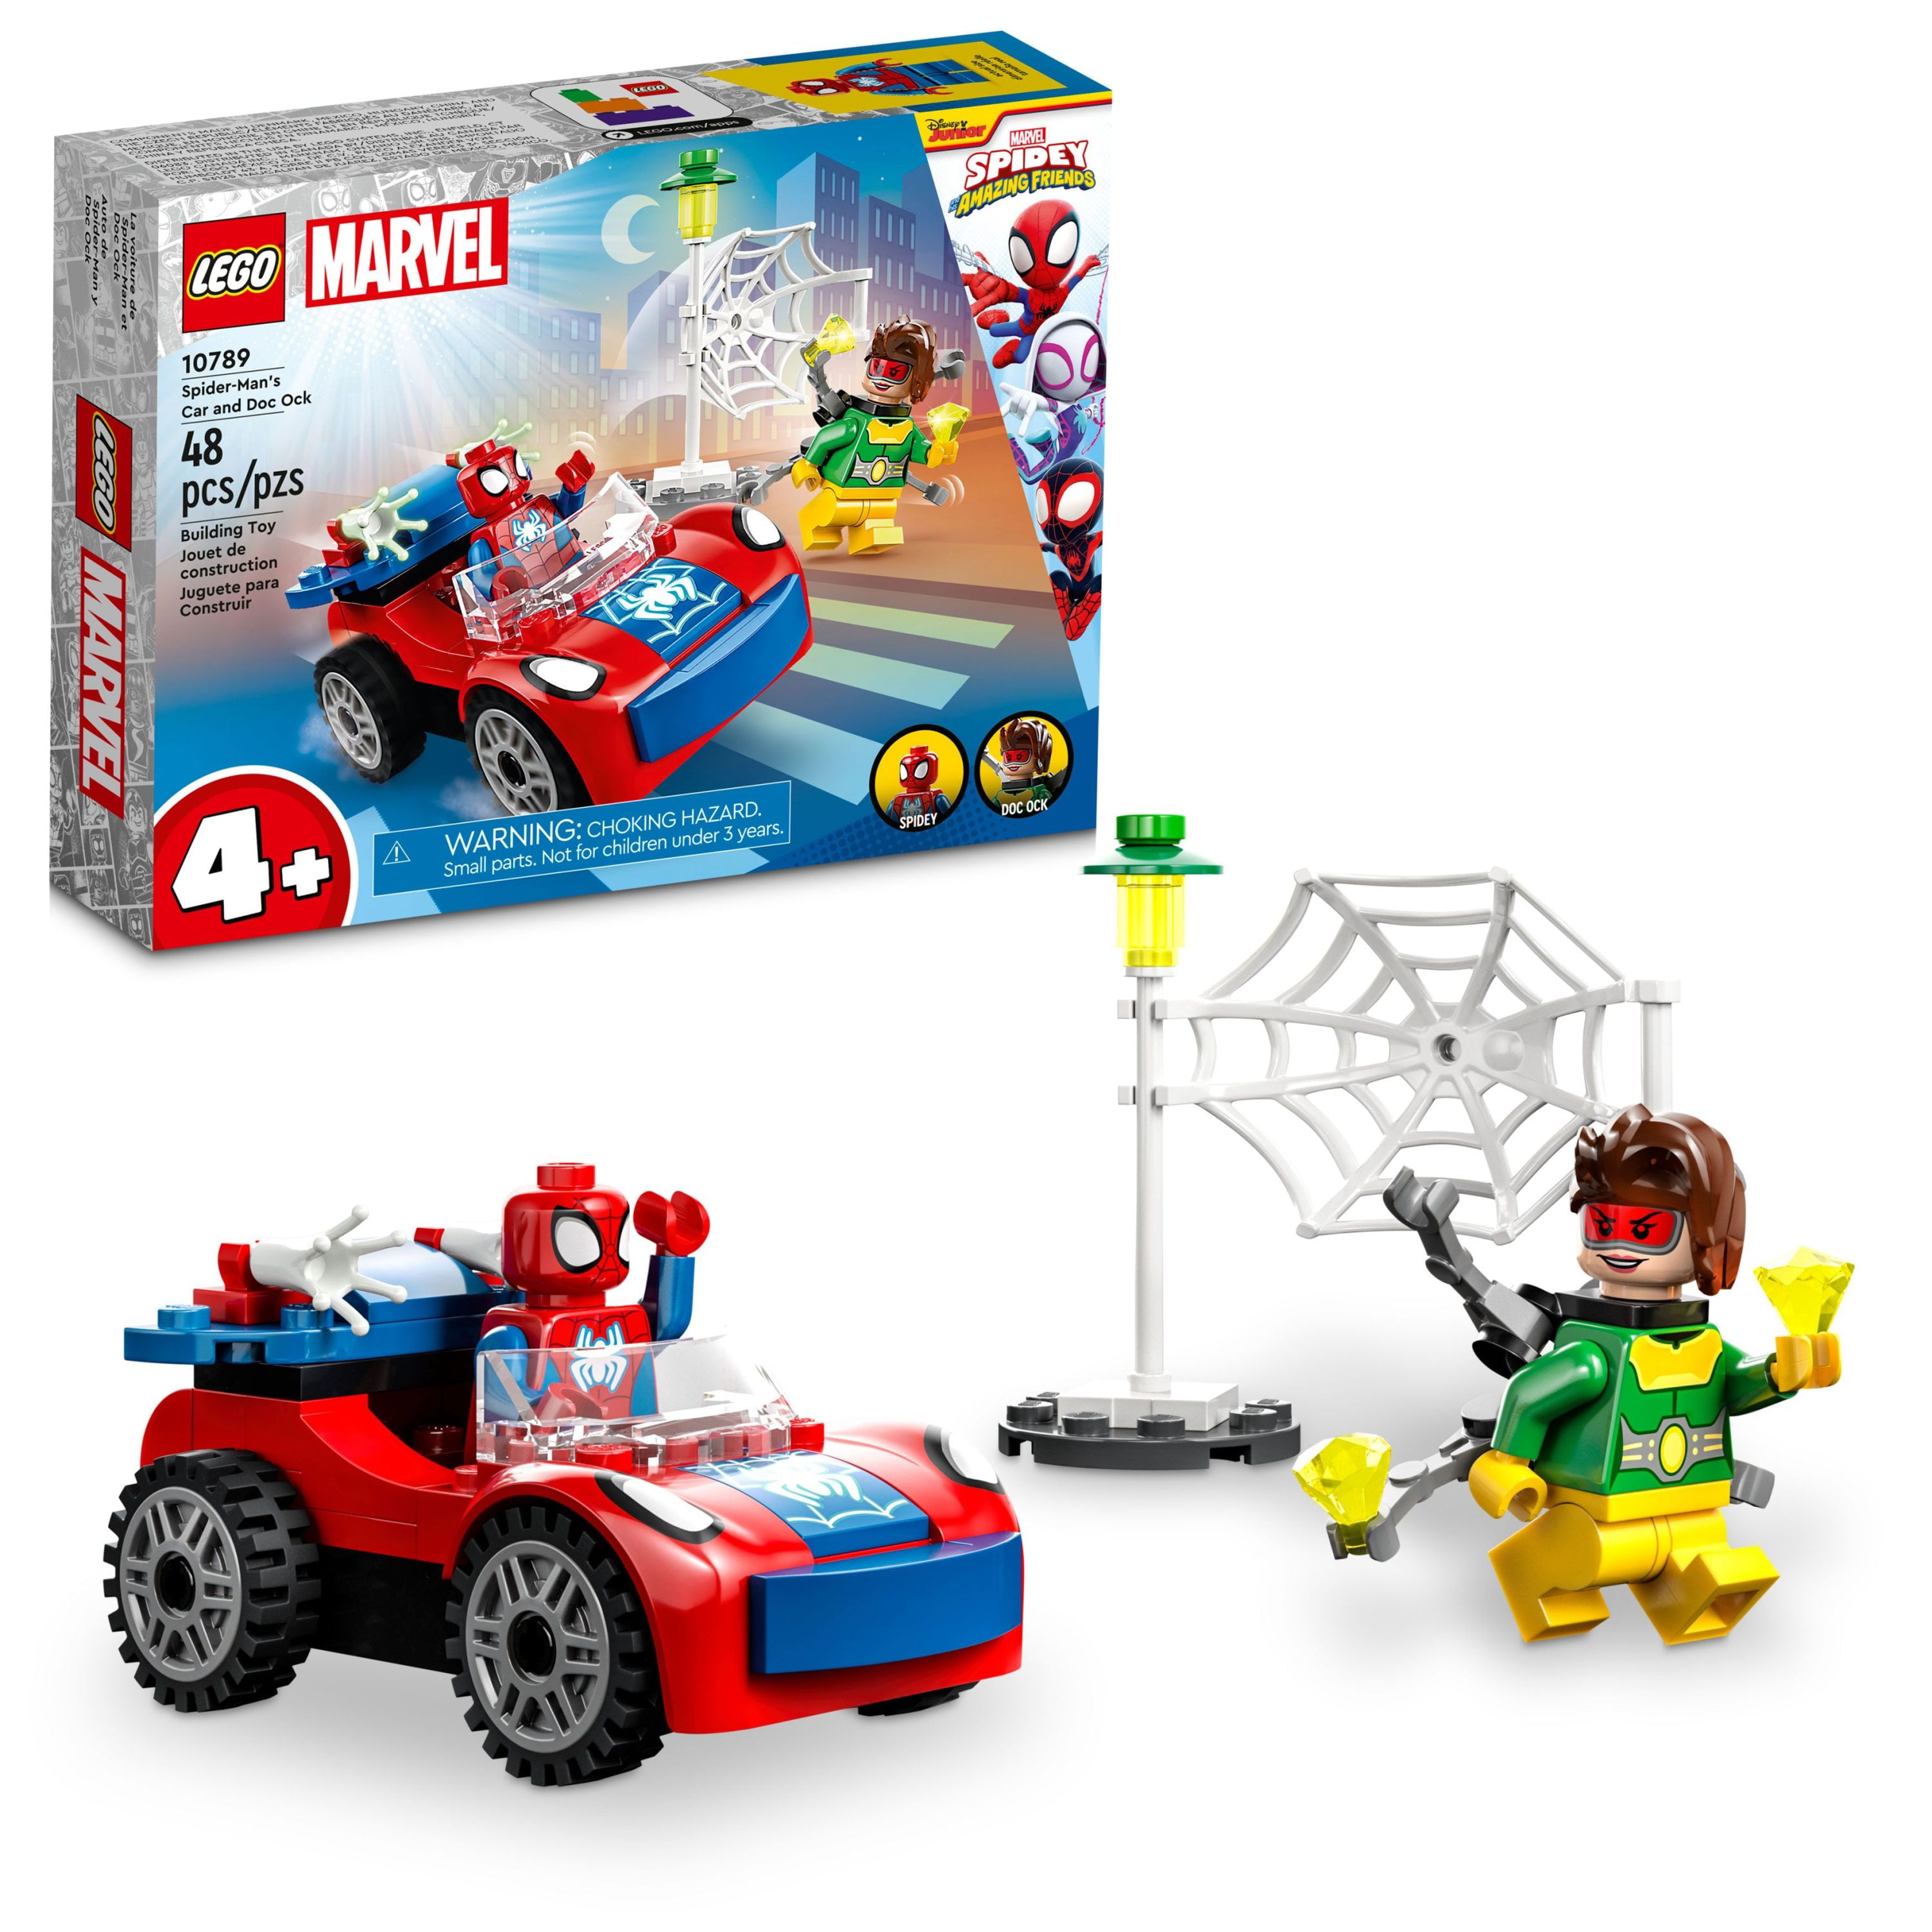 voksen døråbning buket LEGO Marvel Spider-Man's Car and Doc Ock Set 10789, Spidey and His Amazing  Friends Buildable Toy for Kids 4 Plus Years Old with Glow in the Dark  Pieces - Walmart.com